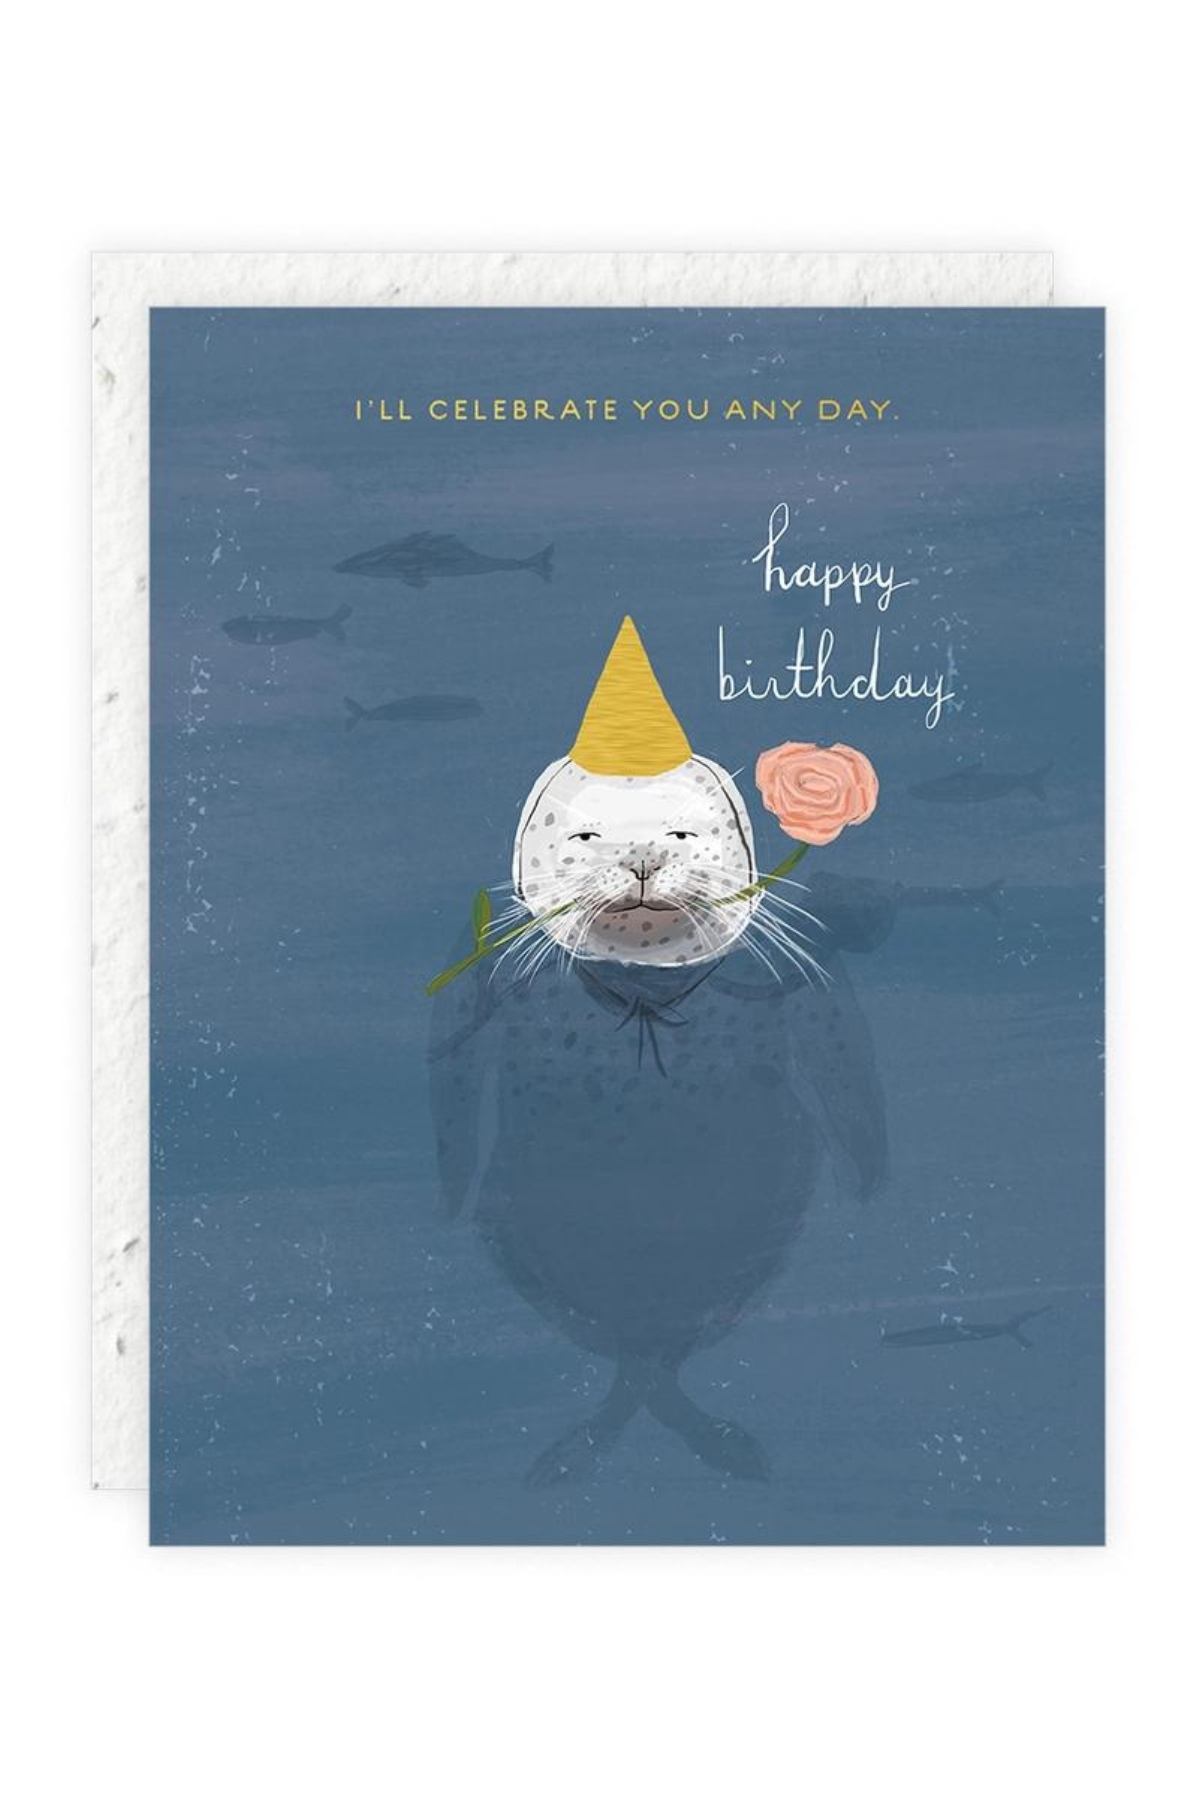 Seedlings Celebrate You Any Day Birthday Card